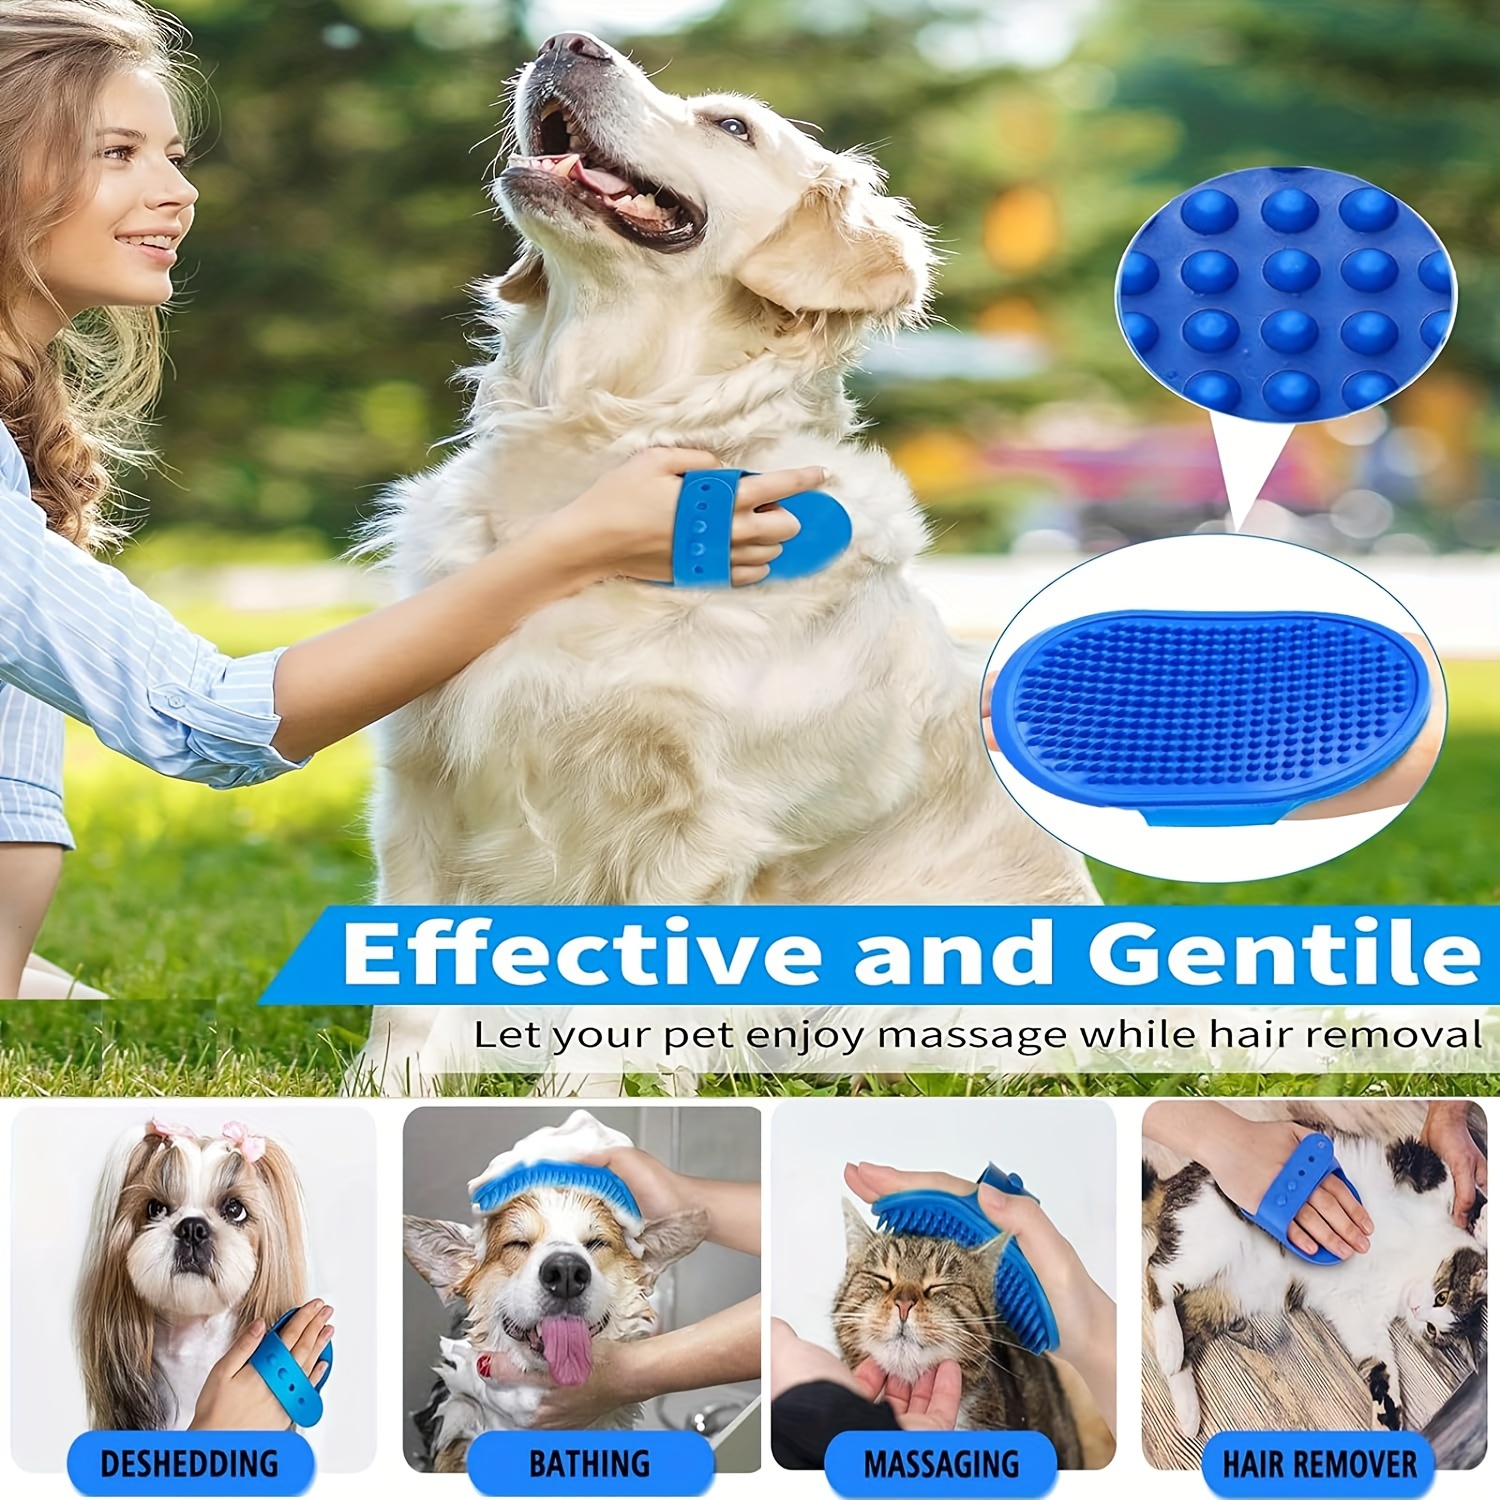 Lick Mat for Dogs, Dog Slow Feeders for Cage, Dog Training Toy/Tools,Reduce  Anxiety in Large/Medium/Small Dog Cages,Pet Supplies 